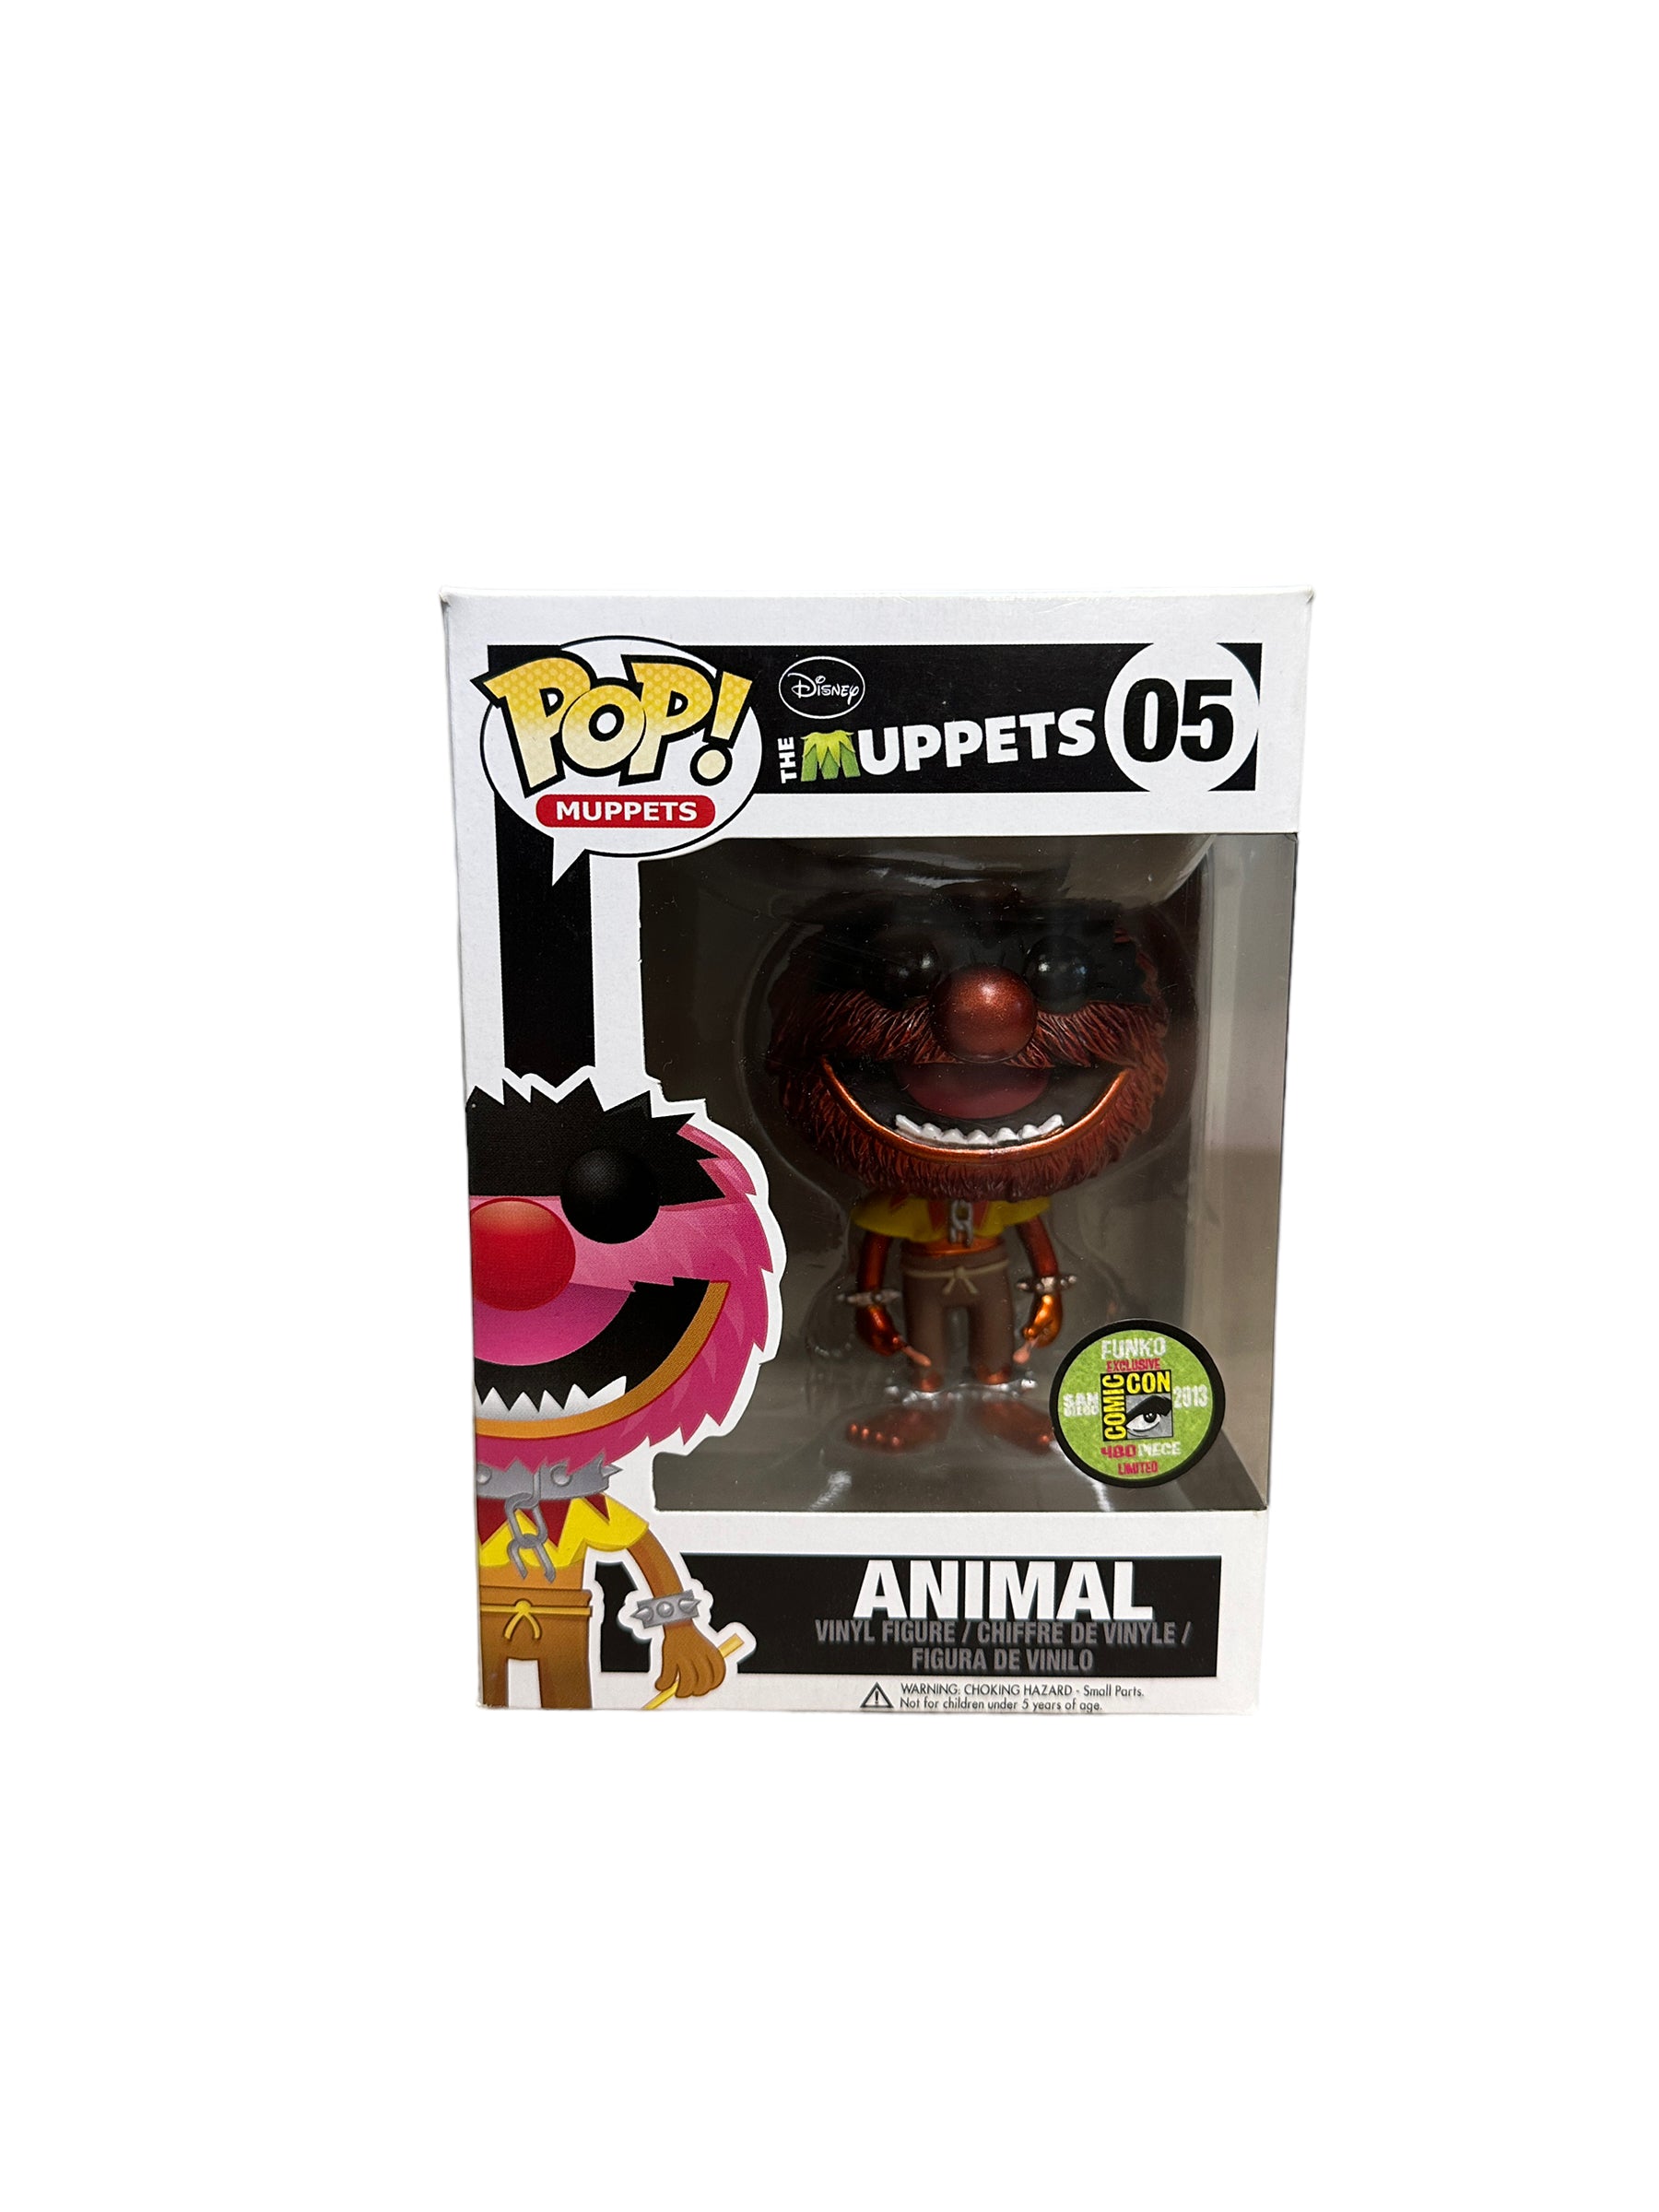 Animal #05 (Metallic) Funko Pop! - The Muppets - SDCC 2013 Exclusive LE480 Pcs - Condition 8/10